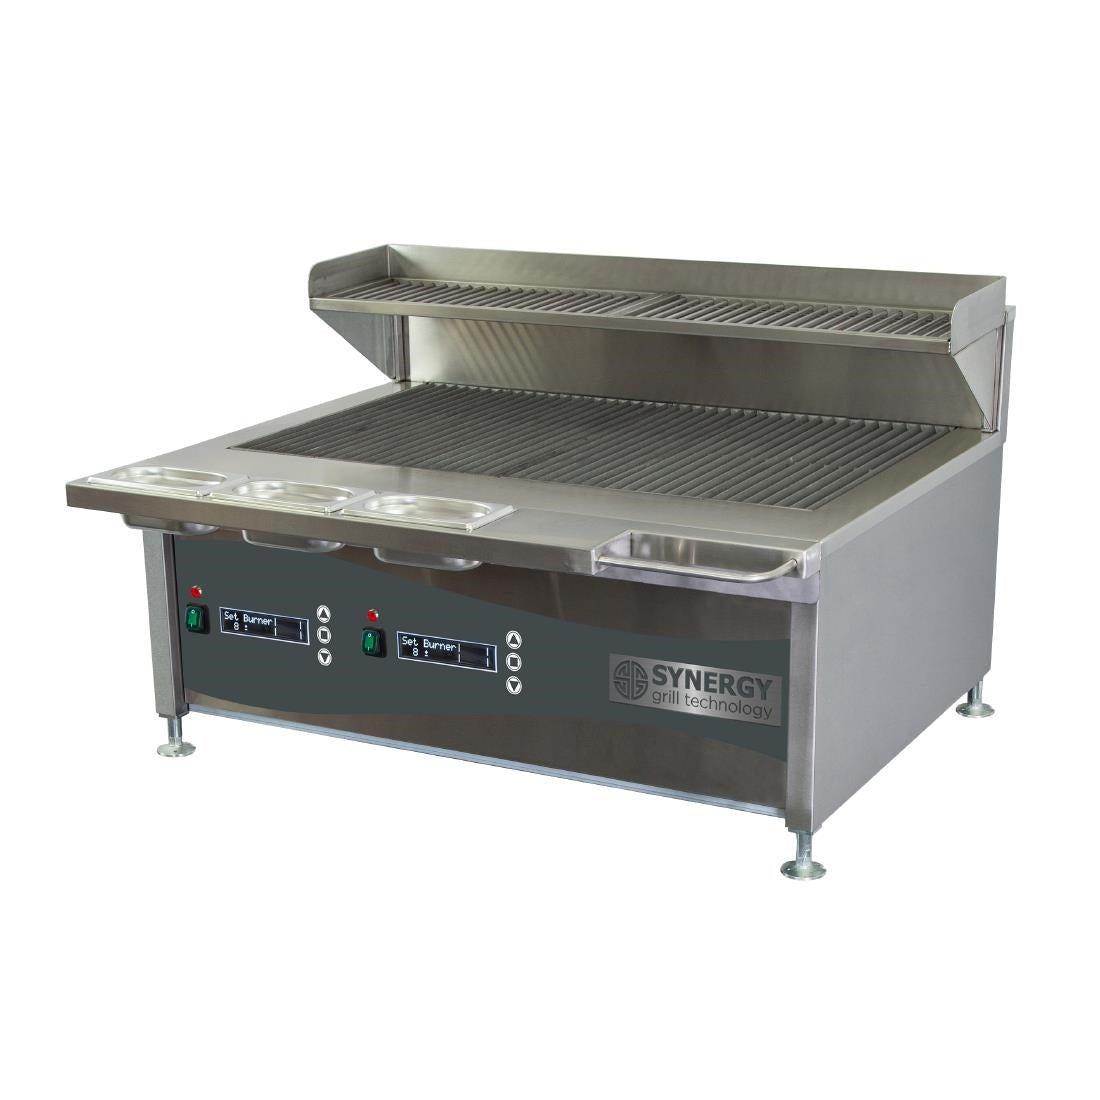 FD490 Synergy Grill Gas Trilogy Chargrill ST900 FD490